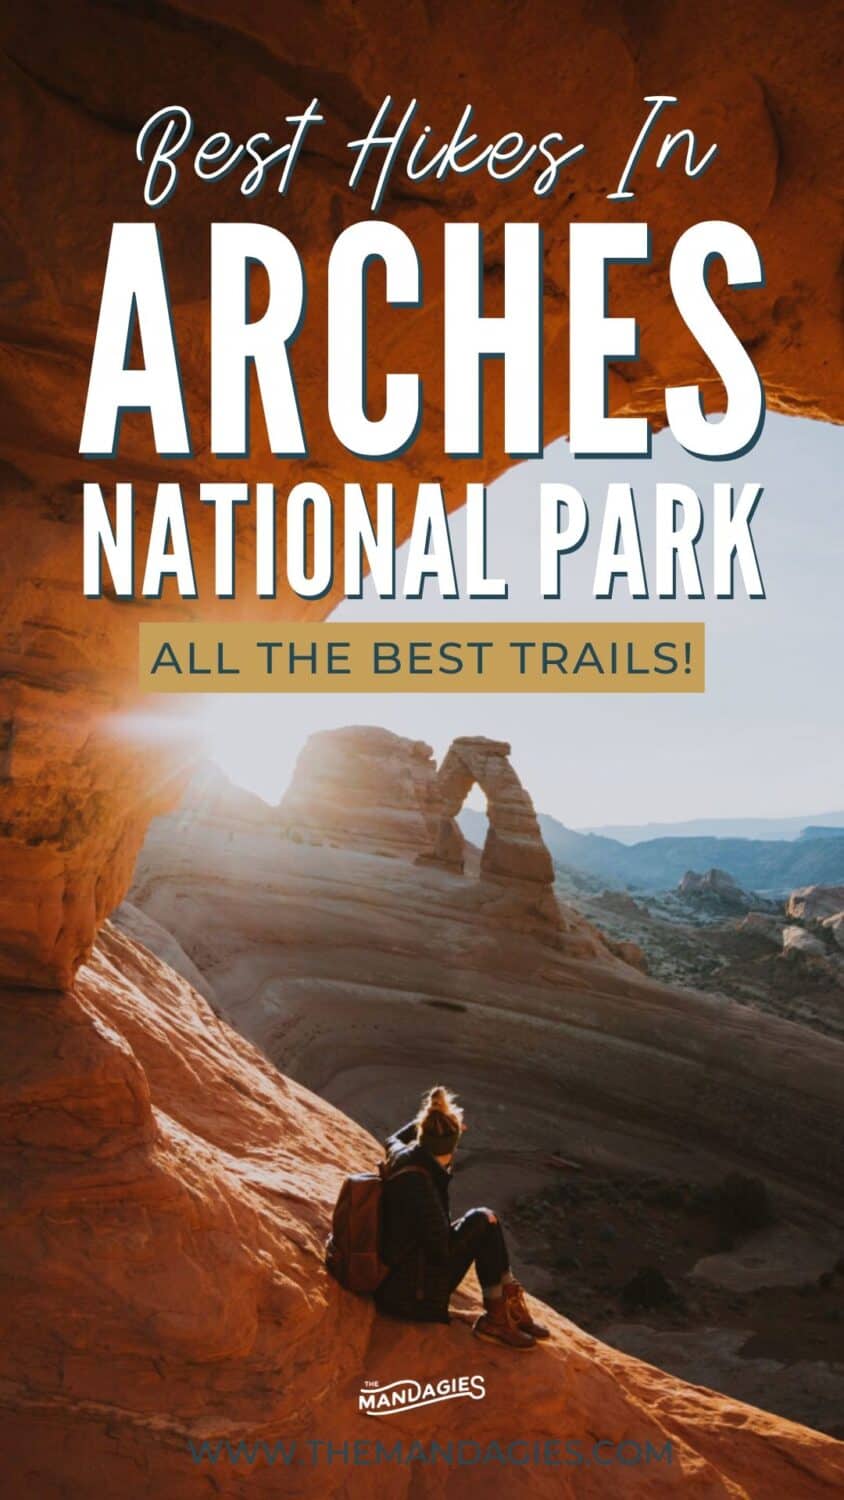 Looking for the best hikes in Arches National Park? Look no further! We're sharing the best hiking trails in Arches, including Delicate Arch, Landscape Arch, Turret Arch. The Windows Loop, Devil's Garden Loop, and so much more! Save this post for your next trip to Moab, Utah! #utah #moab #arches #archesnationalpark #delicatearch #nationalparks #hiking #photography #desert